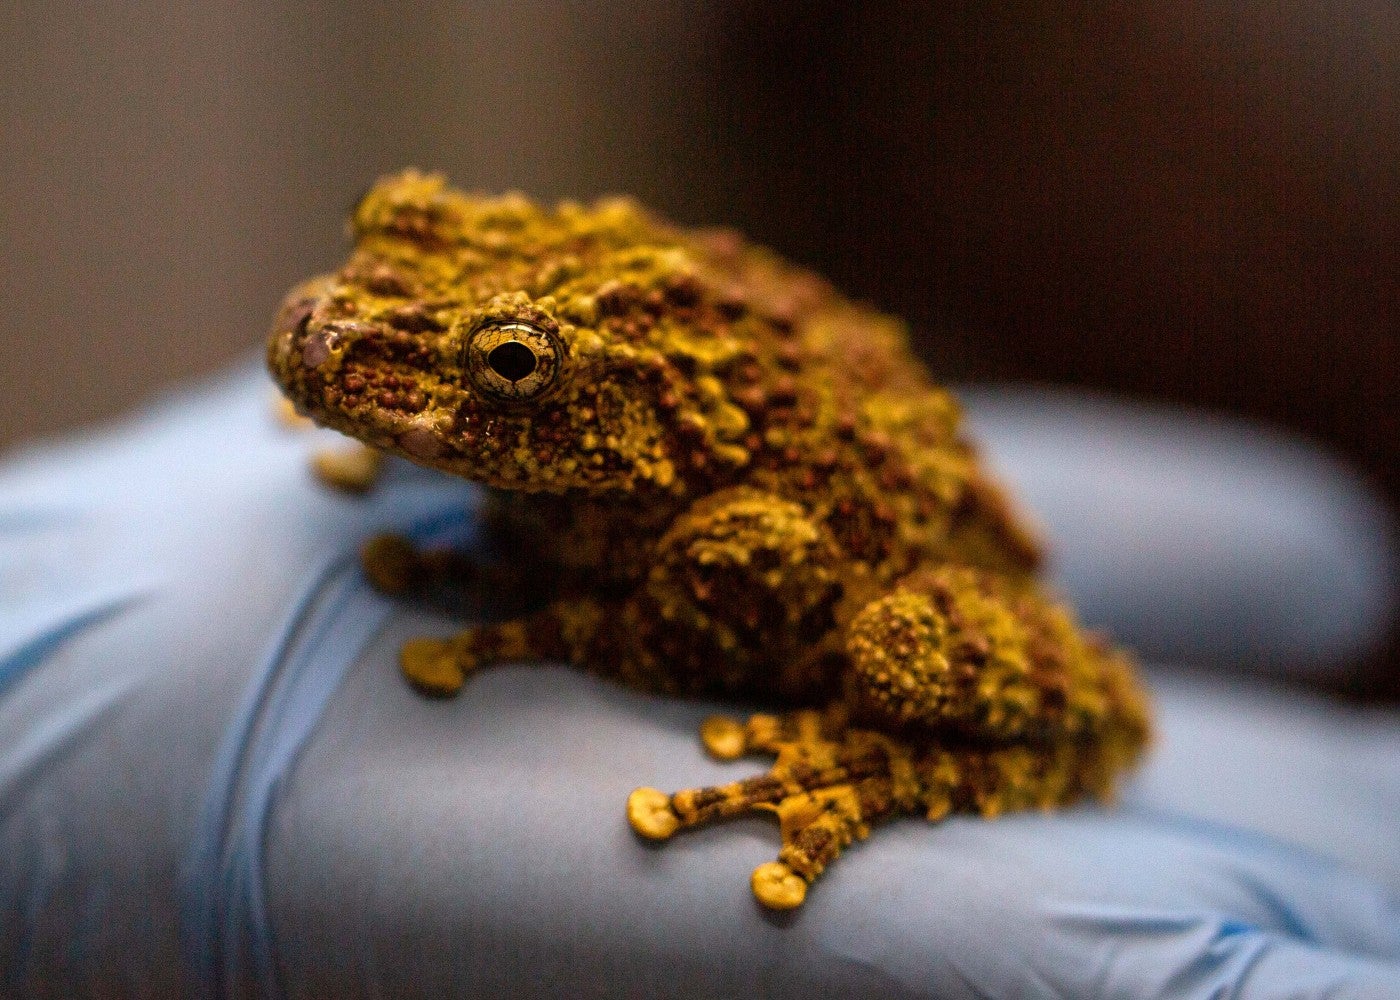 Vietnamese mossy frog in a gloved hand